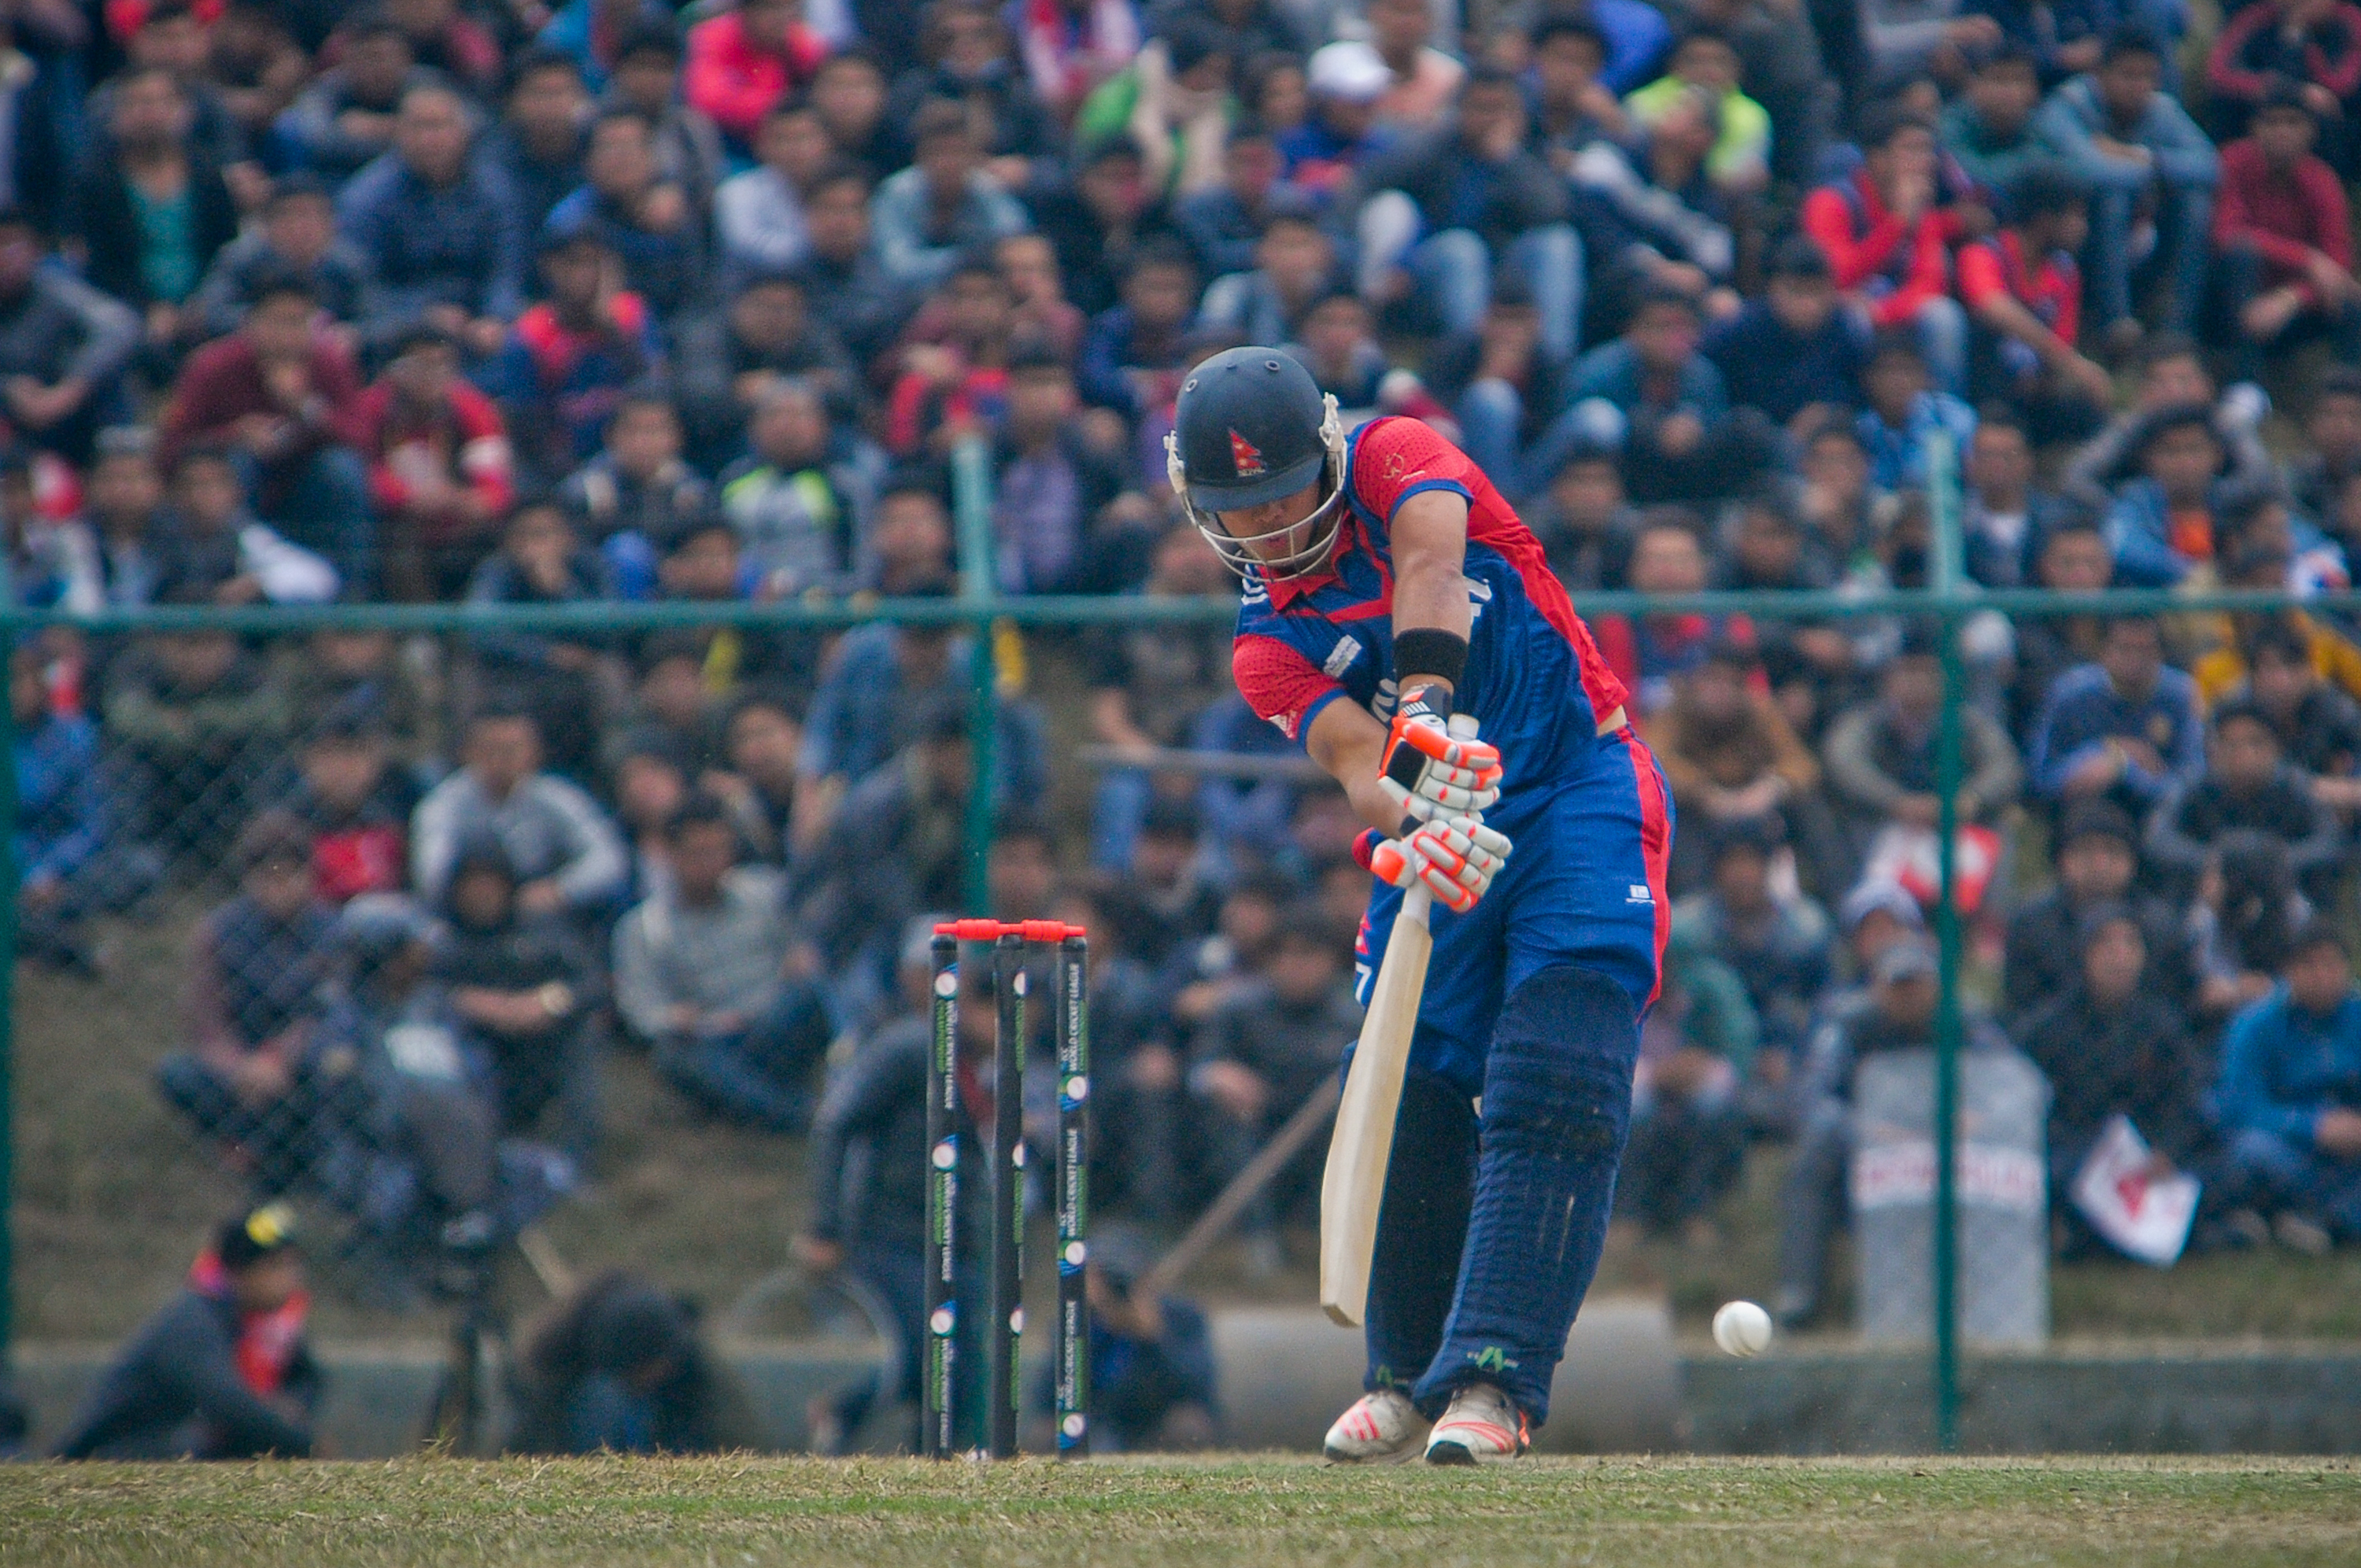 Nepal loses first match against Kenya by 5 wickets in ICC World League Championship (With Photo Features)